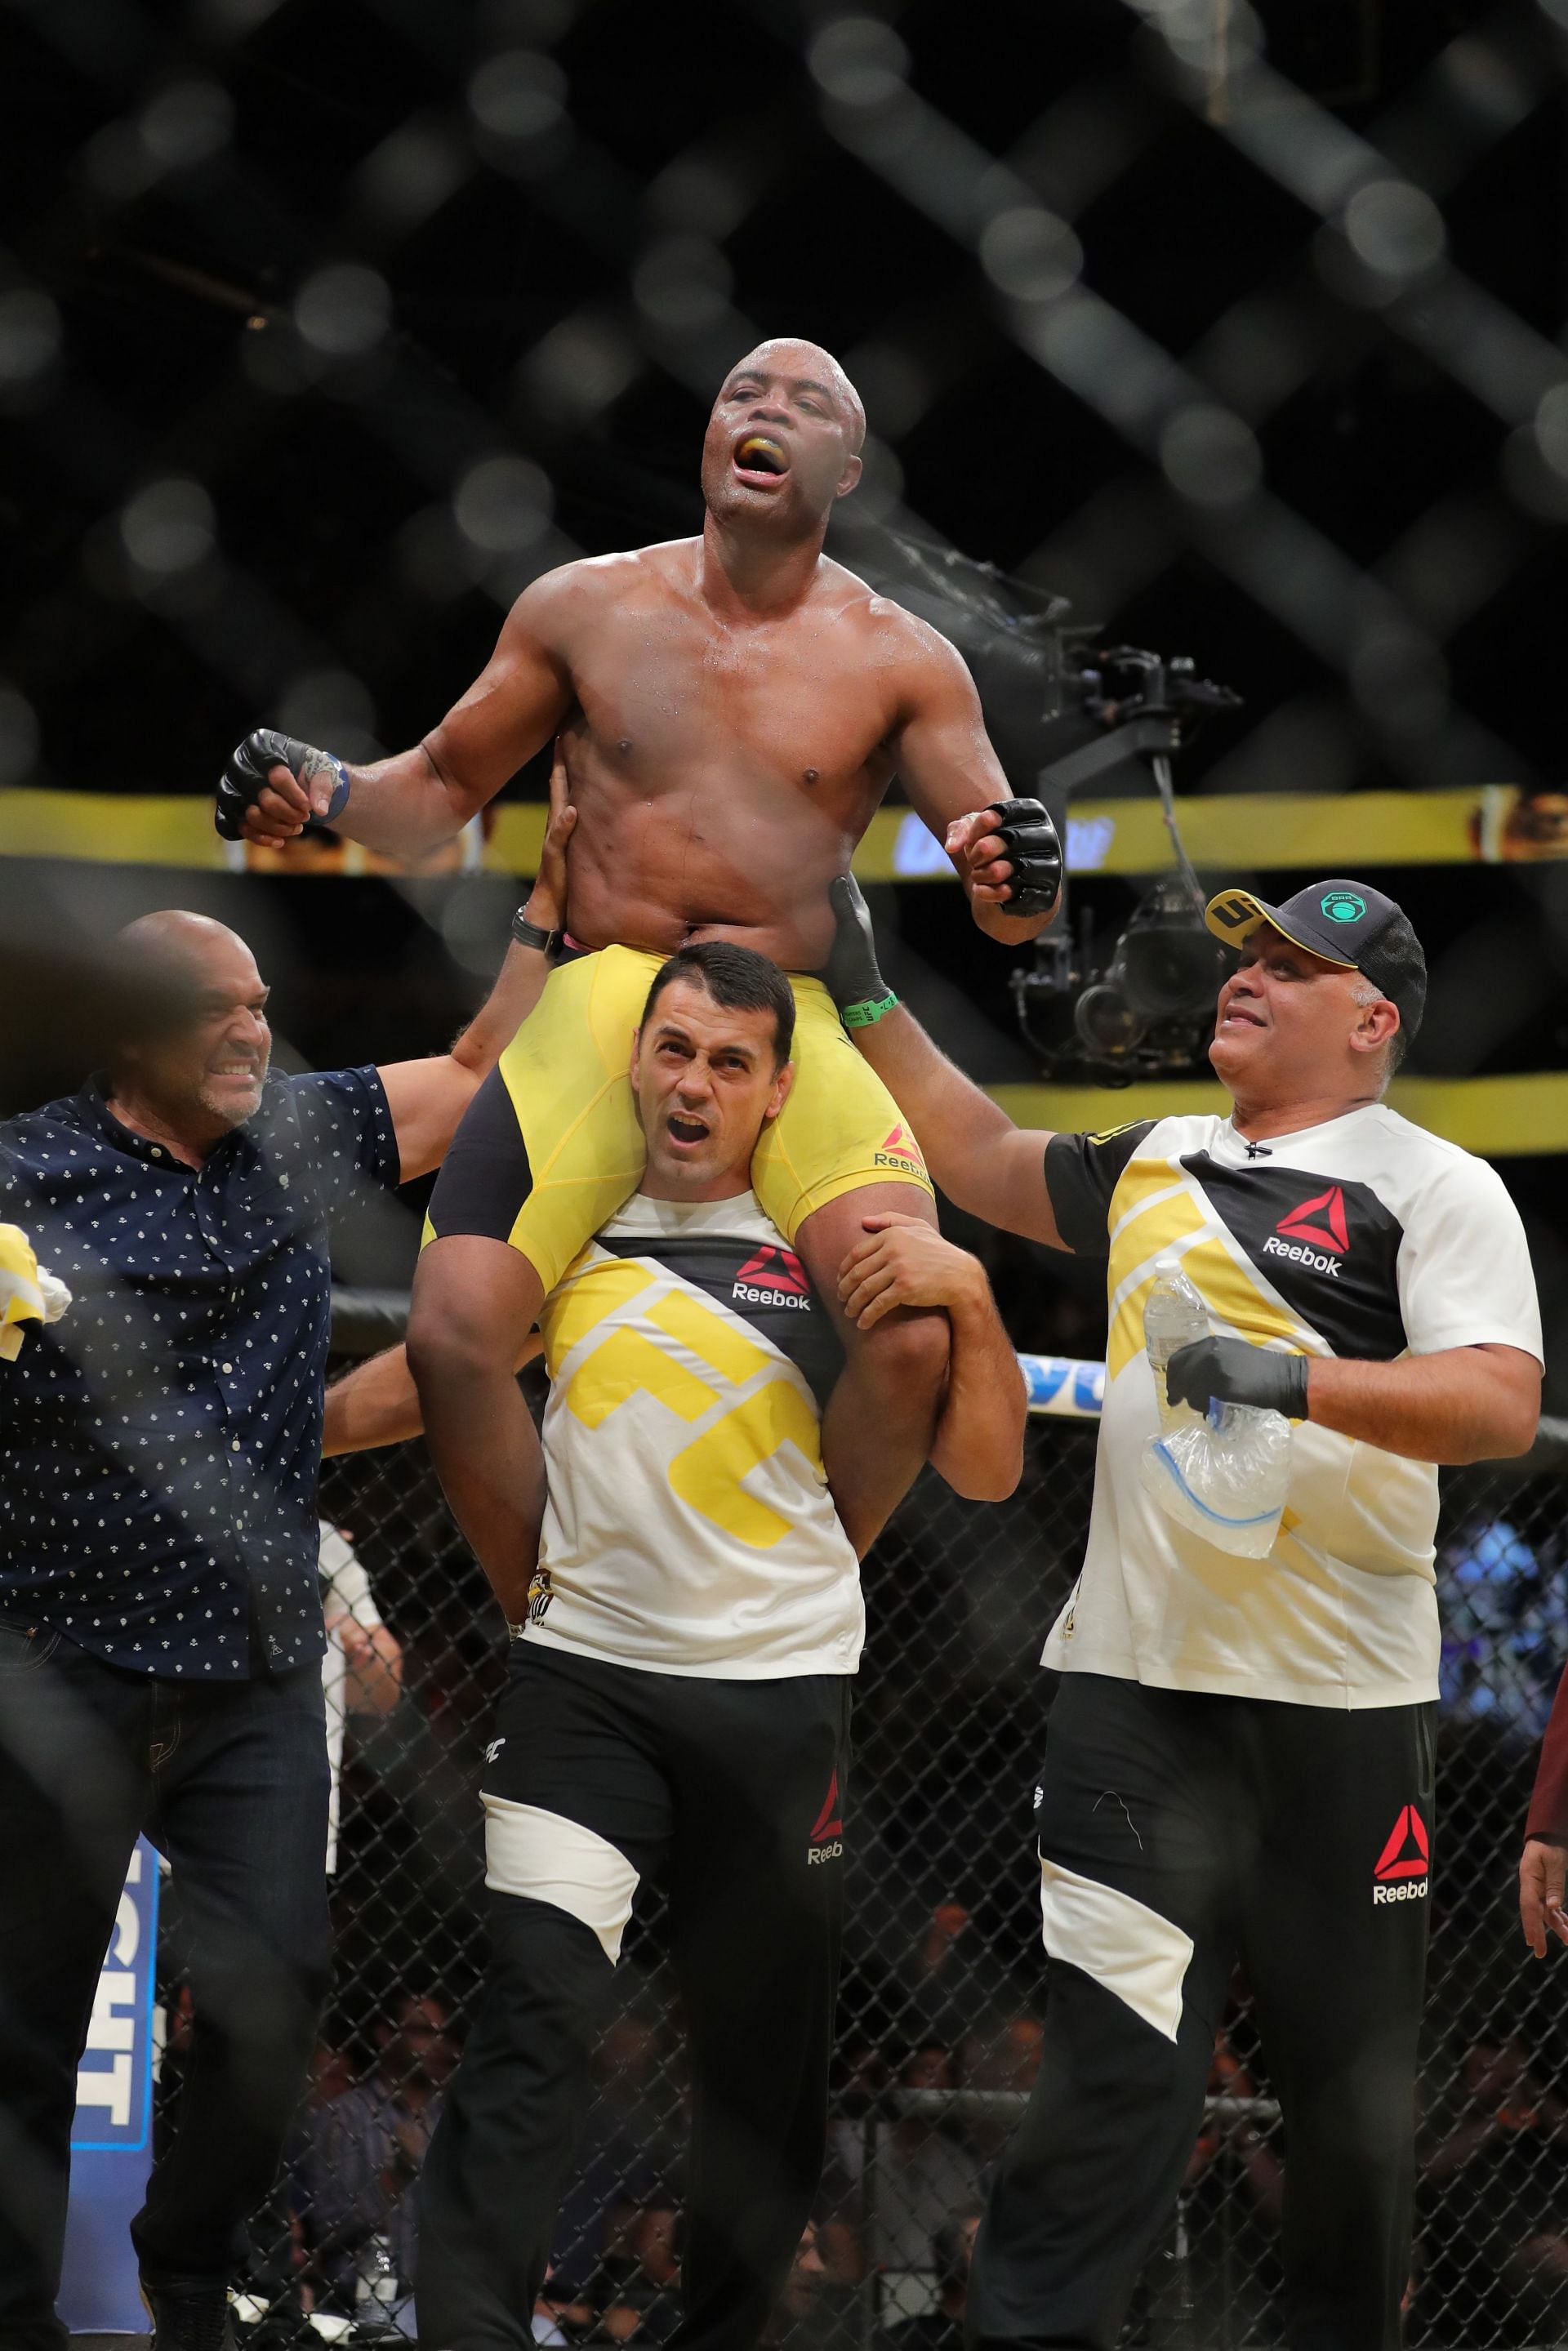 Anderson Silva has been labeled by many as the greatest fighter ever to do it